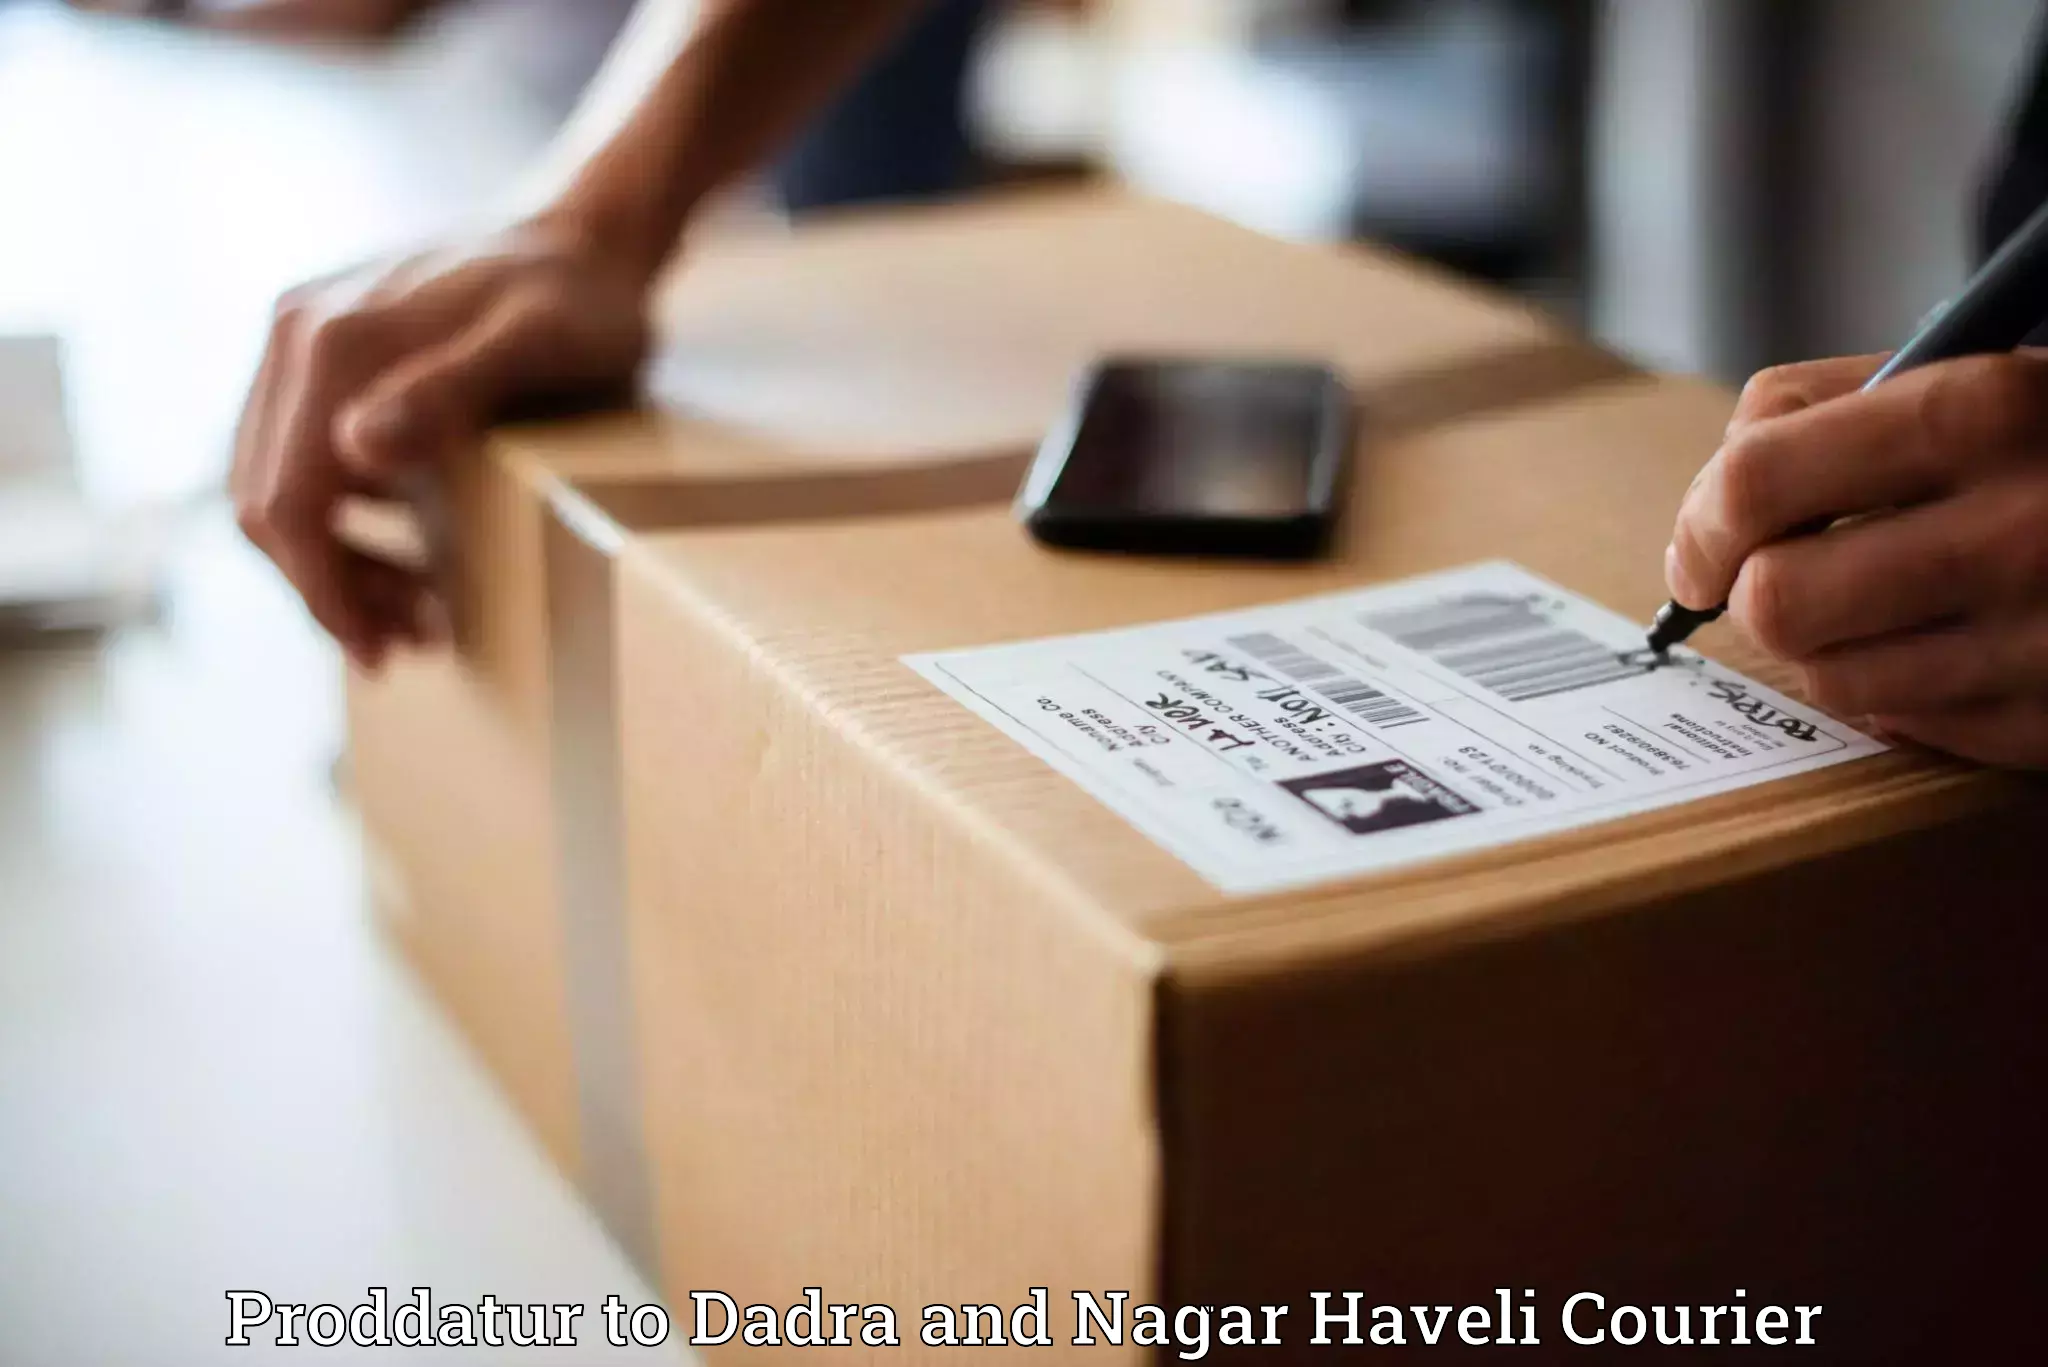 Next-day delivery options Proddatur to Dadra and Nagar Haveli